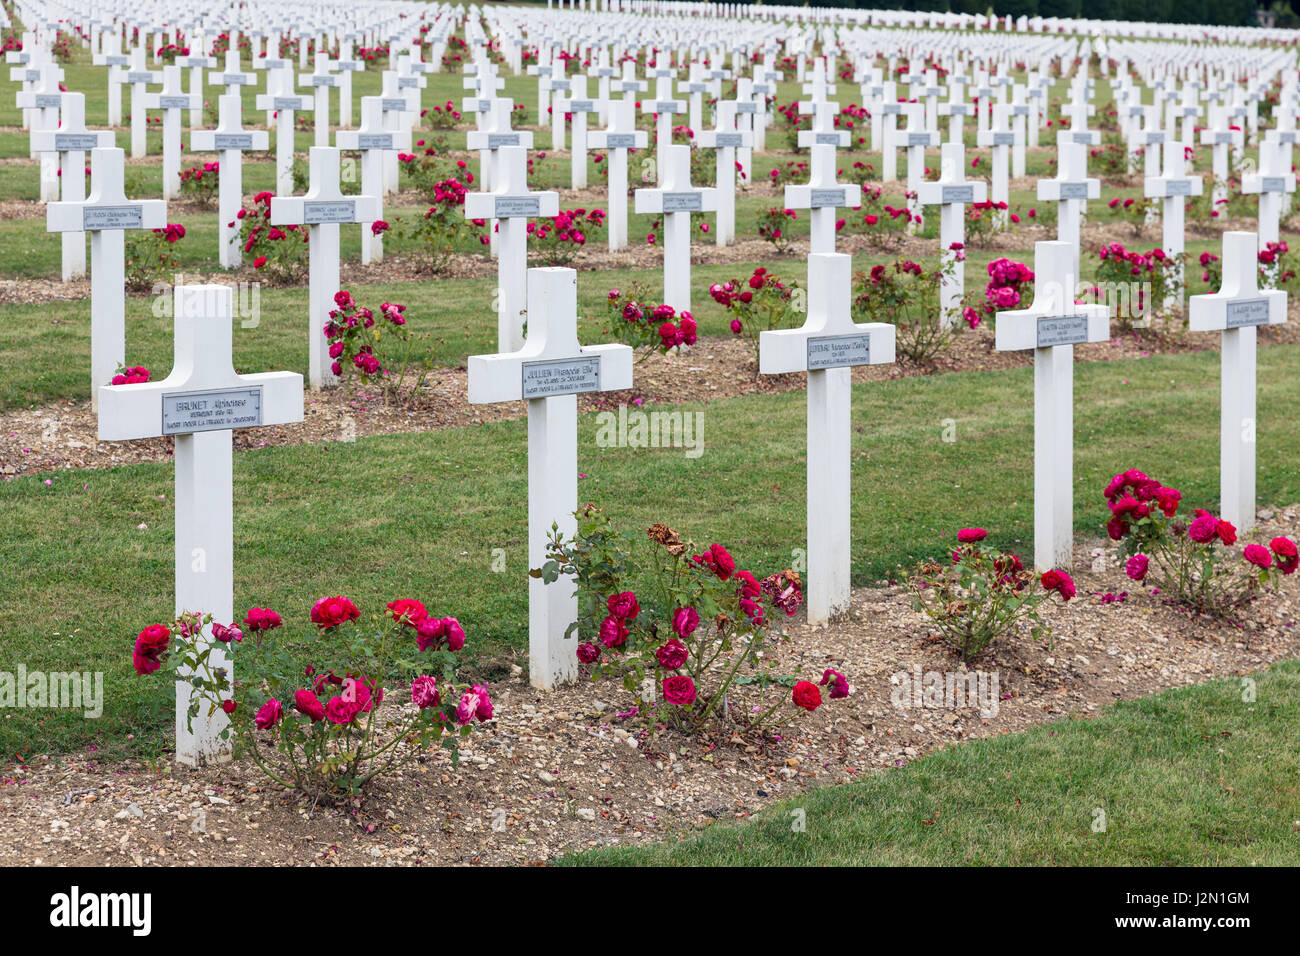 VERDUN, FRANCE - AUGUST 19, 2016: Cemetery for First World War One soldiers who died at Battle of Verdun Stock Photo